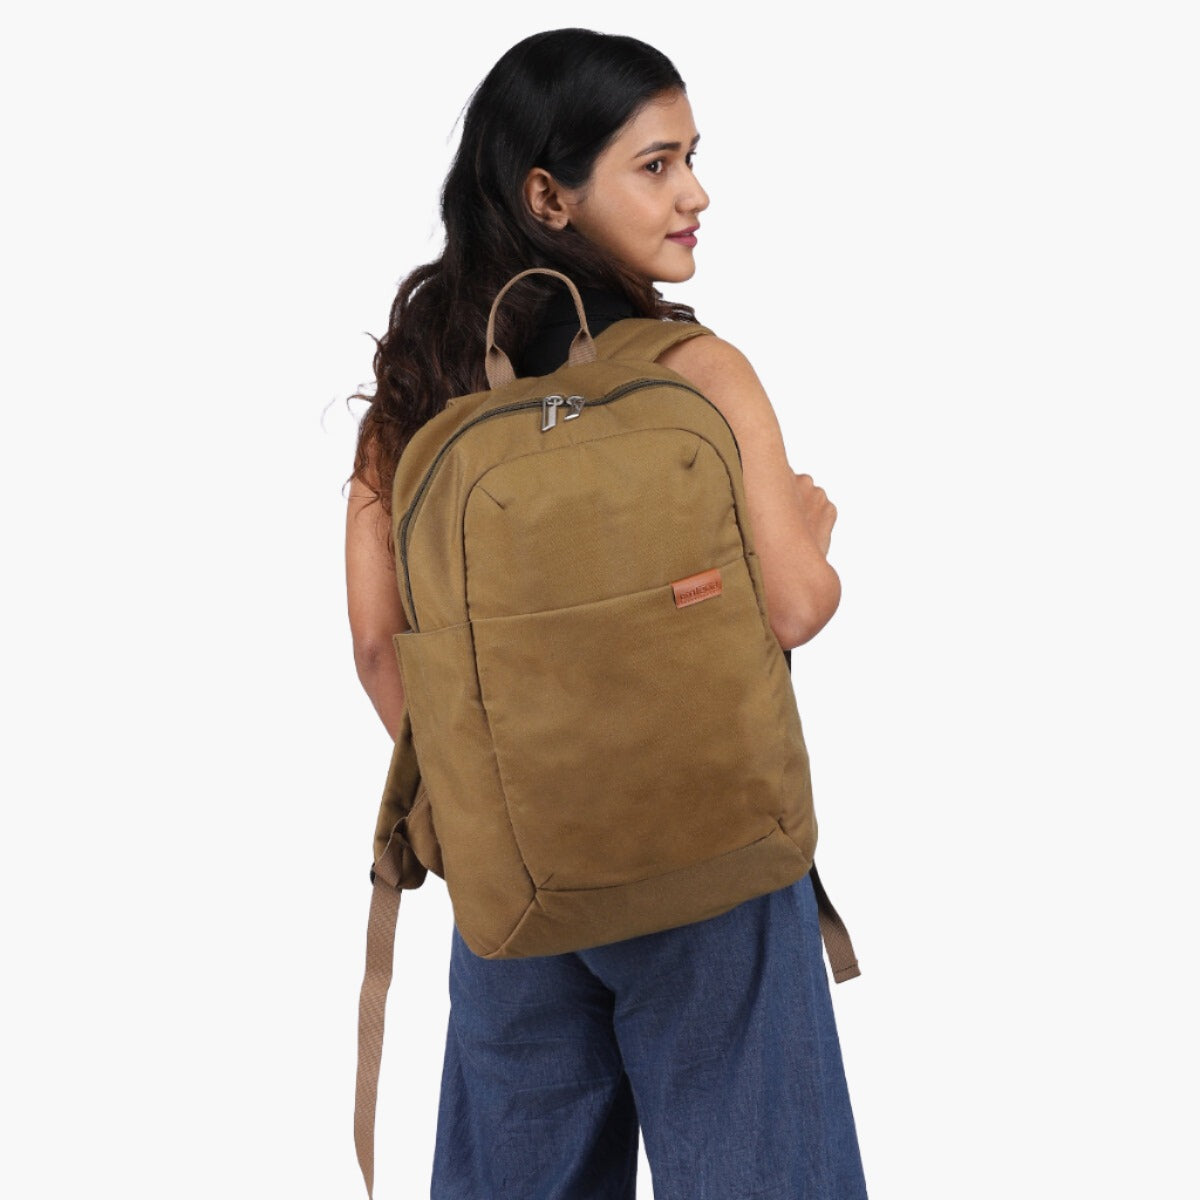 Beige | Protecta Strong Buzz Laptop Backpack - 6